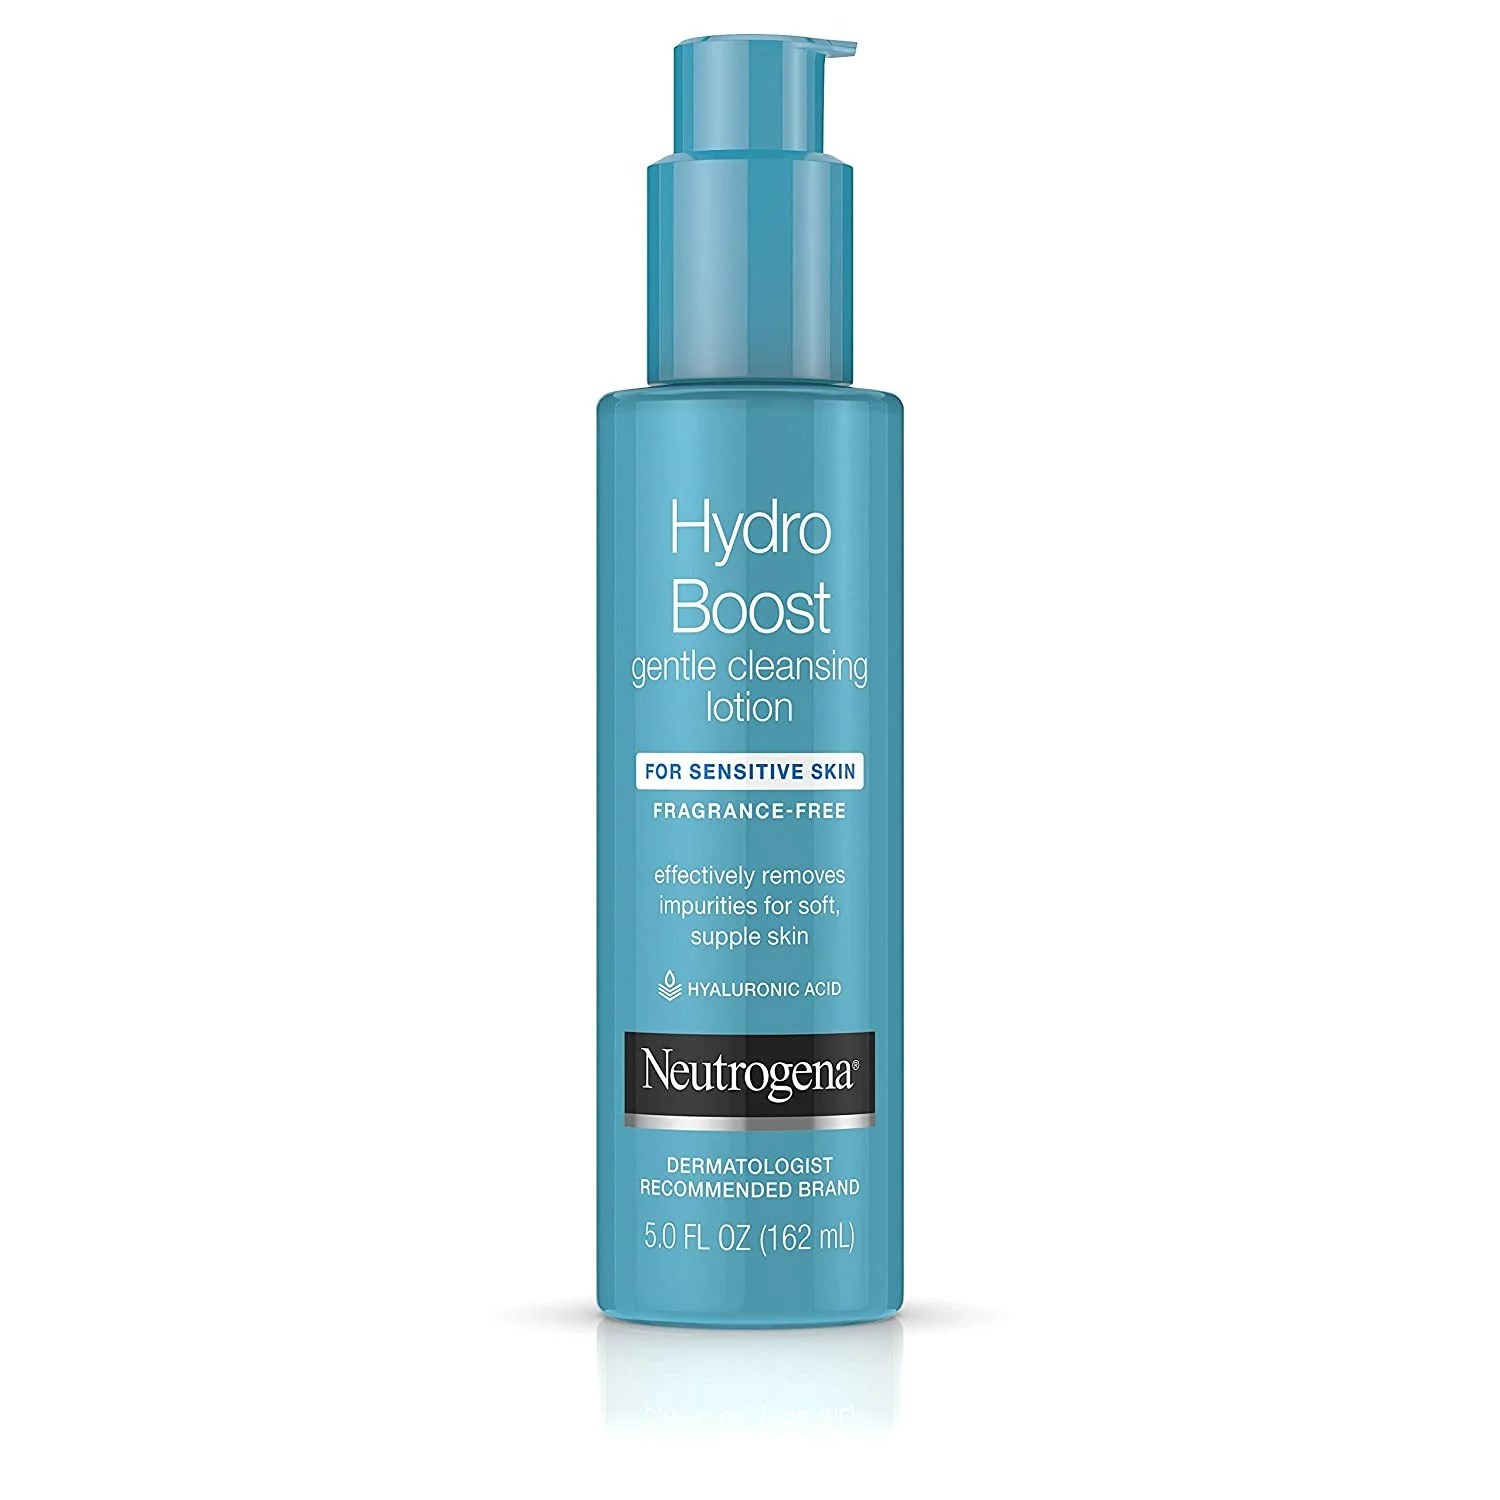 Neutrogena Hydro Boost Gentle Cleansing Lotion, sensitive skin care rules